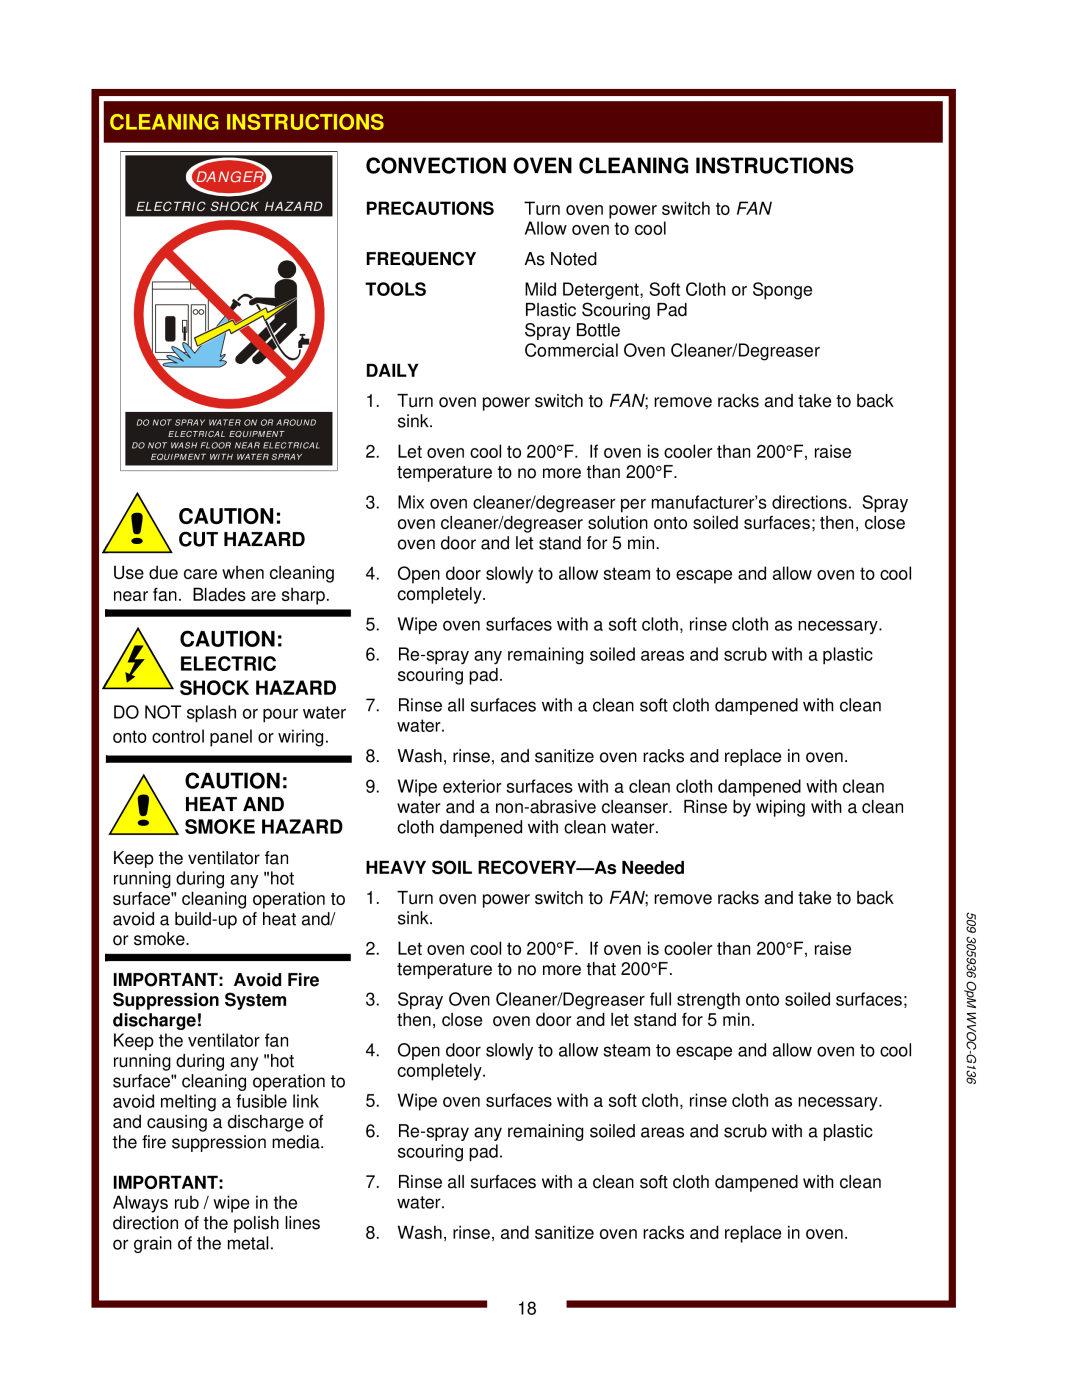 Bloomfield WVOC-G136 Convection Oven Cleaning Instructions, Cut Hazard, Heat And Smoke Hazard, Precautions, Frequency 